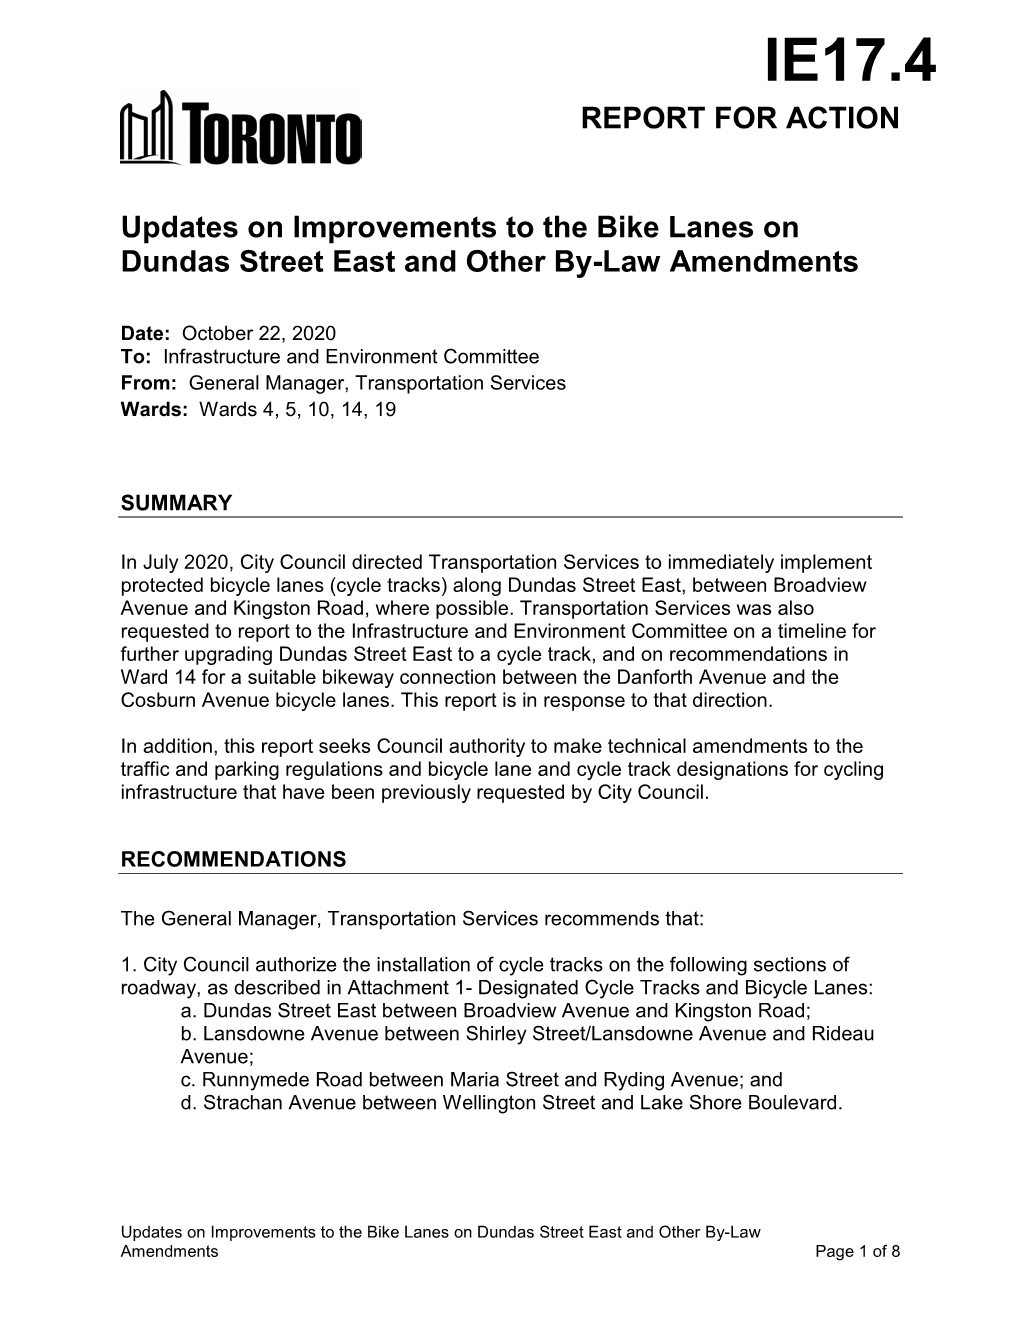 Updates on Improvements to the Bike Lanes on Dundas Street East and Other By-Law Amendments